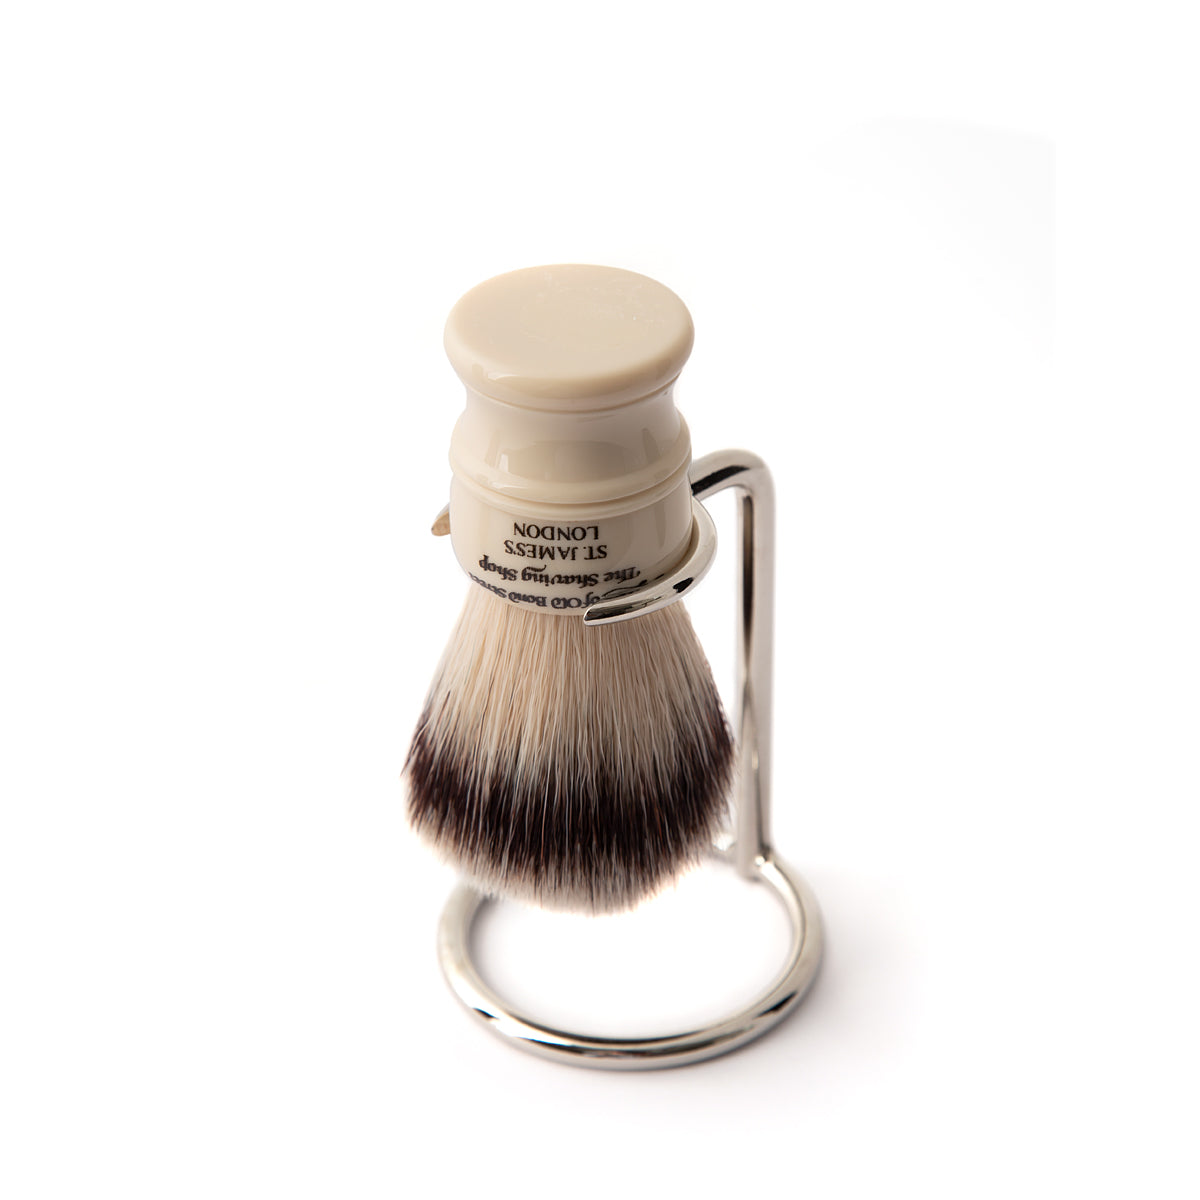 Large Nickel Shaving Brush Stand from Taylor of Old Bond Street 